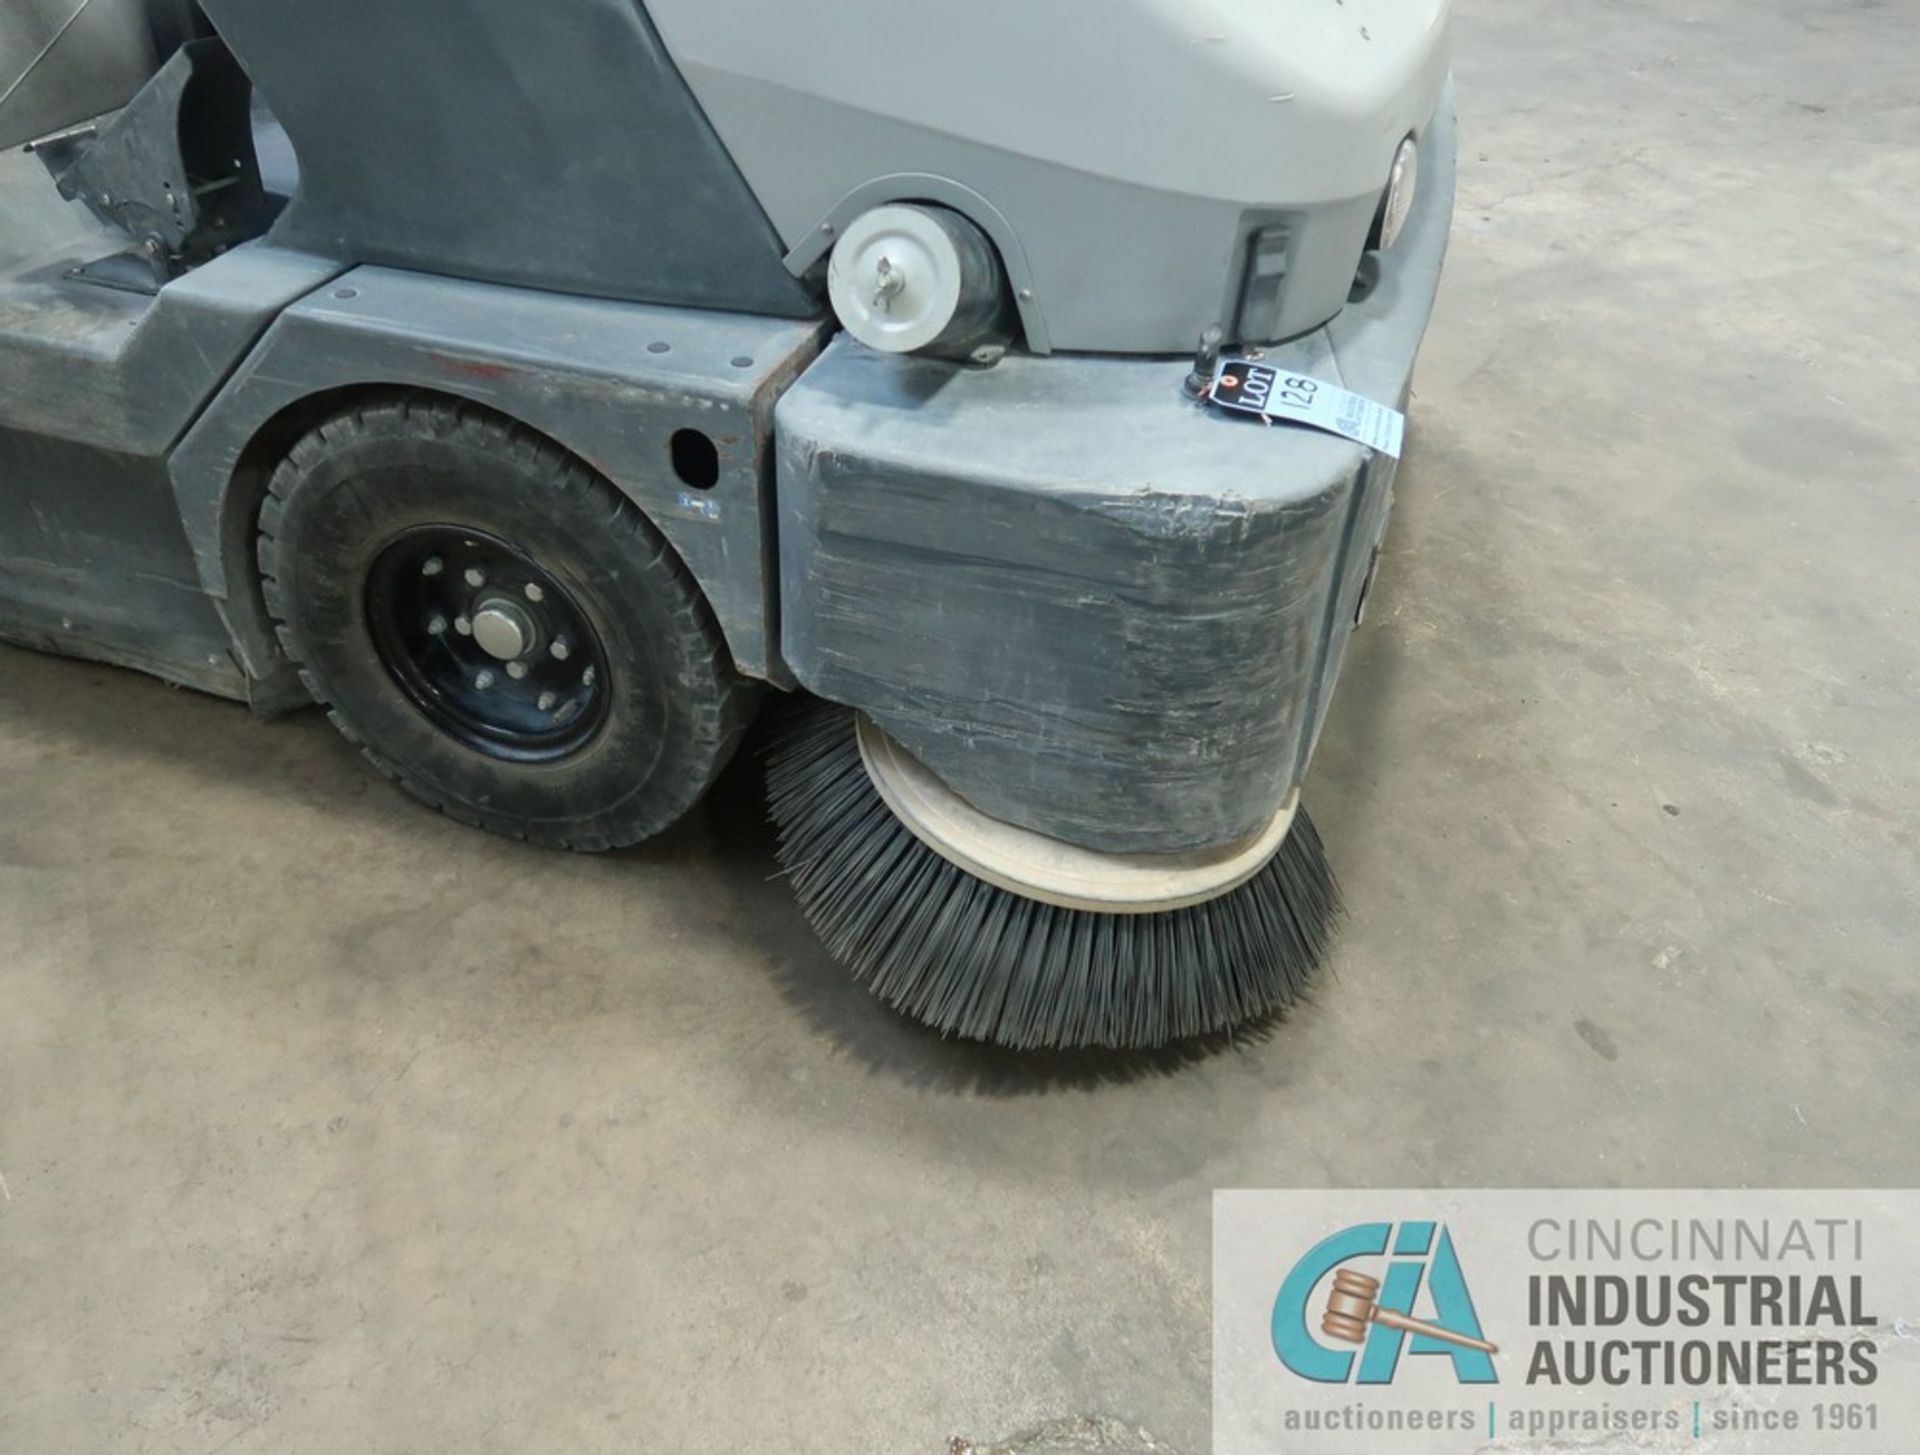 2018 ADVANCE MODEL SW8000 LP GAS FLOOR SWEEPER; S/N 1000064177, 2,902 HOURS SHOWING - Image 5 of 12